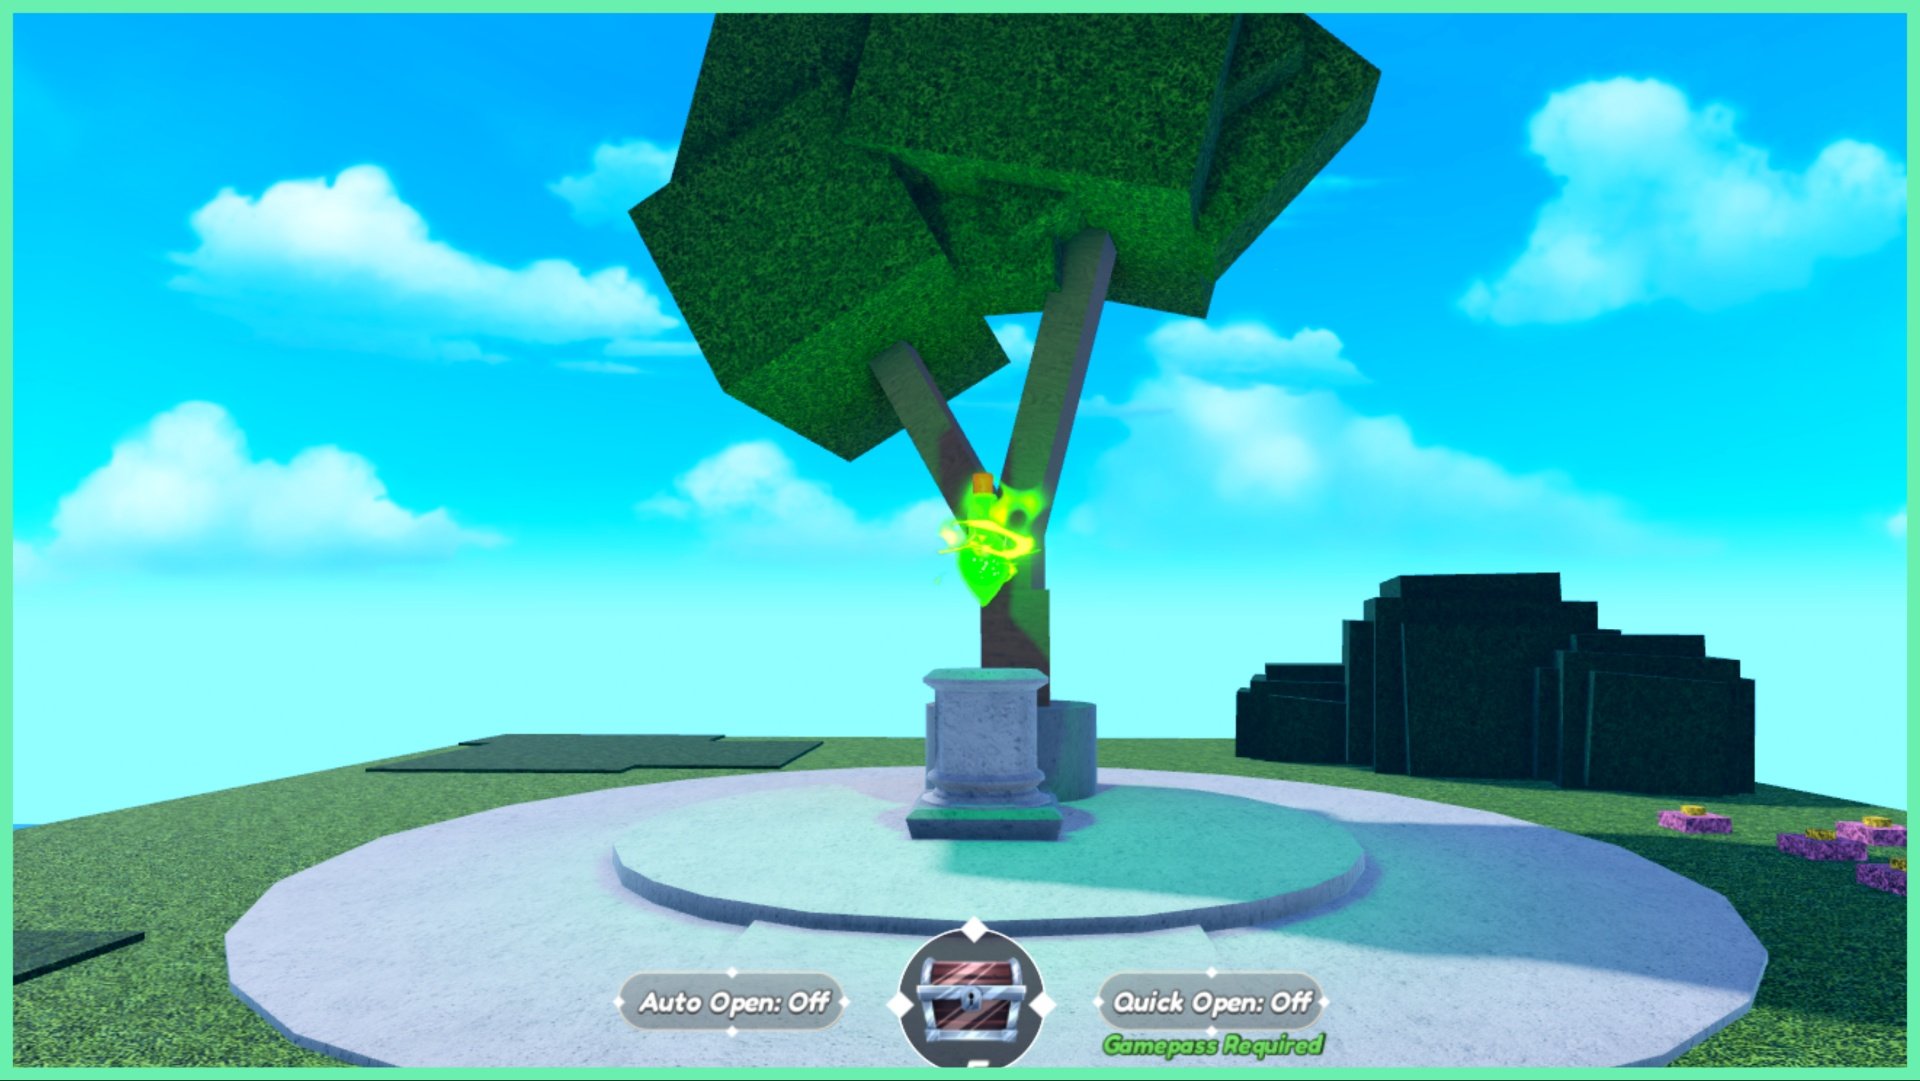 The image shows the end of the parkour with a tree behind a central grey pedestal which has a floating green potion in the centre of the podium. The sky behind is lovely and blue.